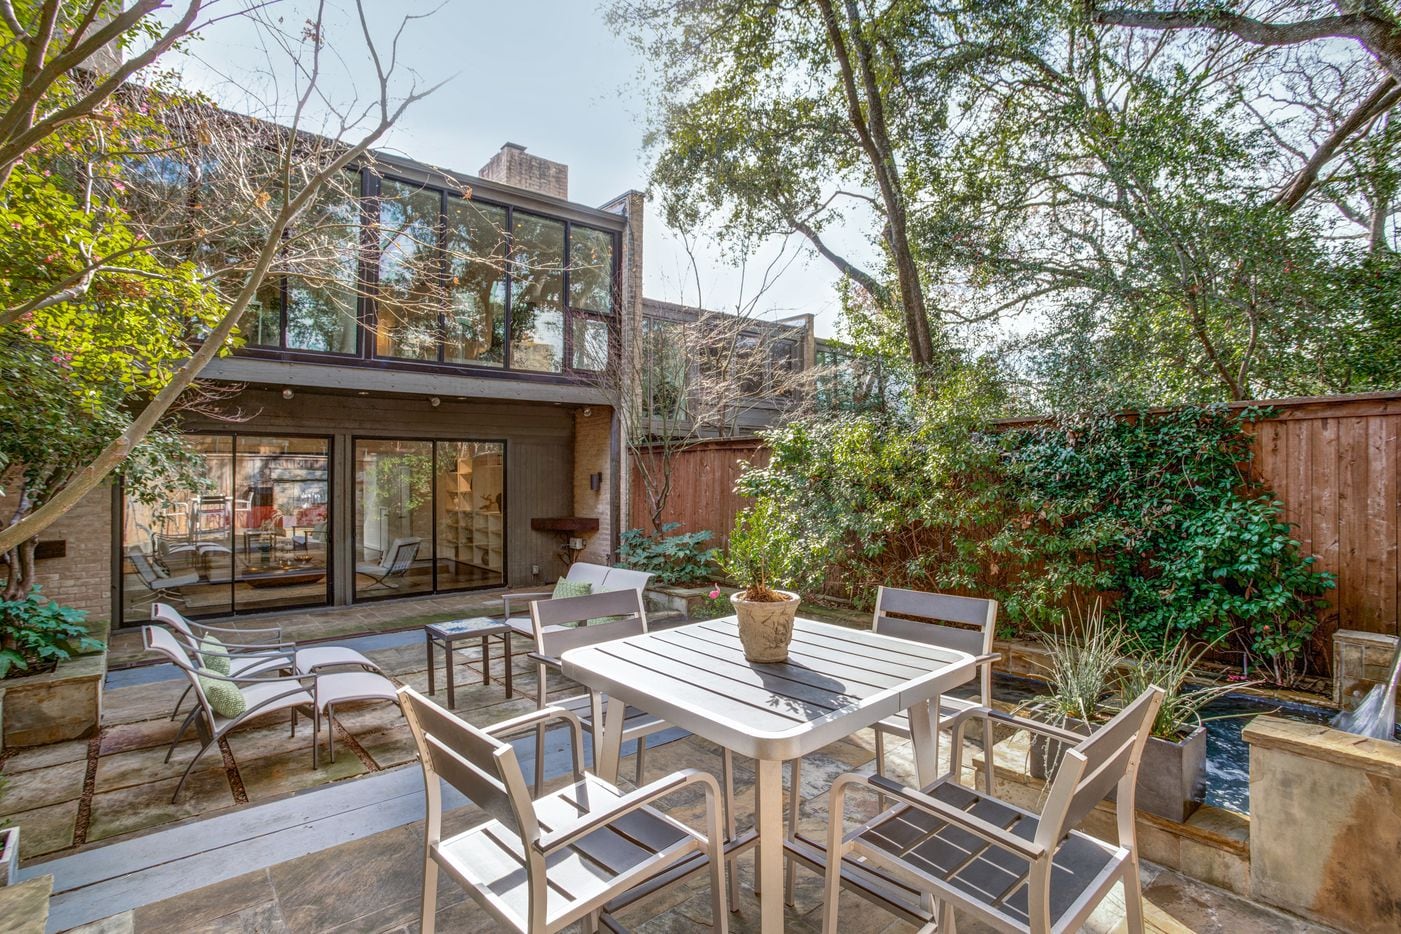 Noted Dallas architect Frank Welch designed plenty of Texas-sized stunners in Dallas, but this townhouse at 4021 Travis St. in Uptown puts his design on display in a smaller form.